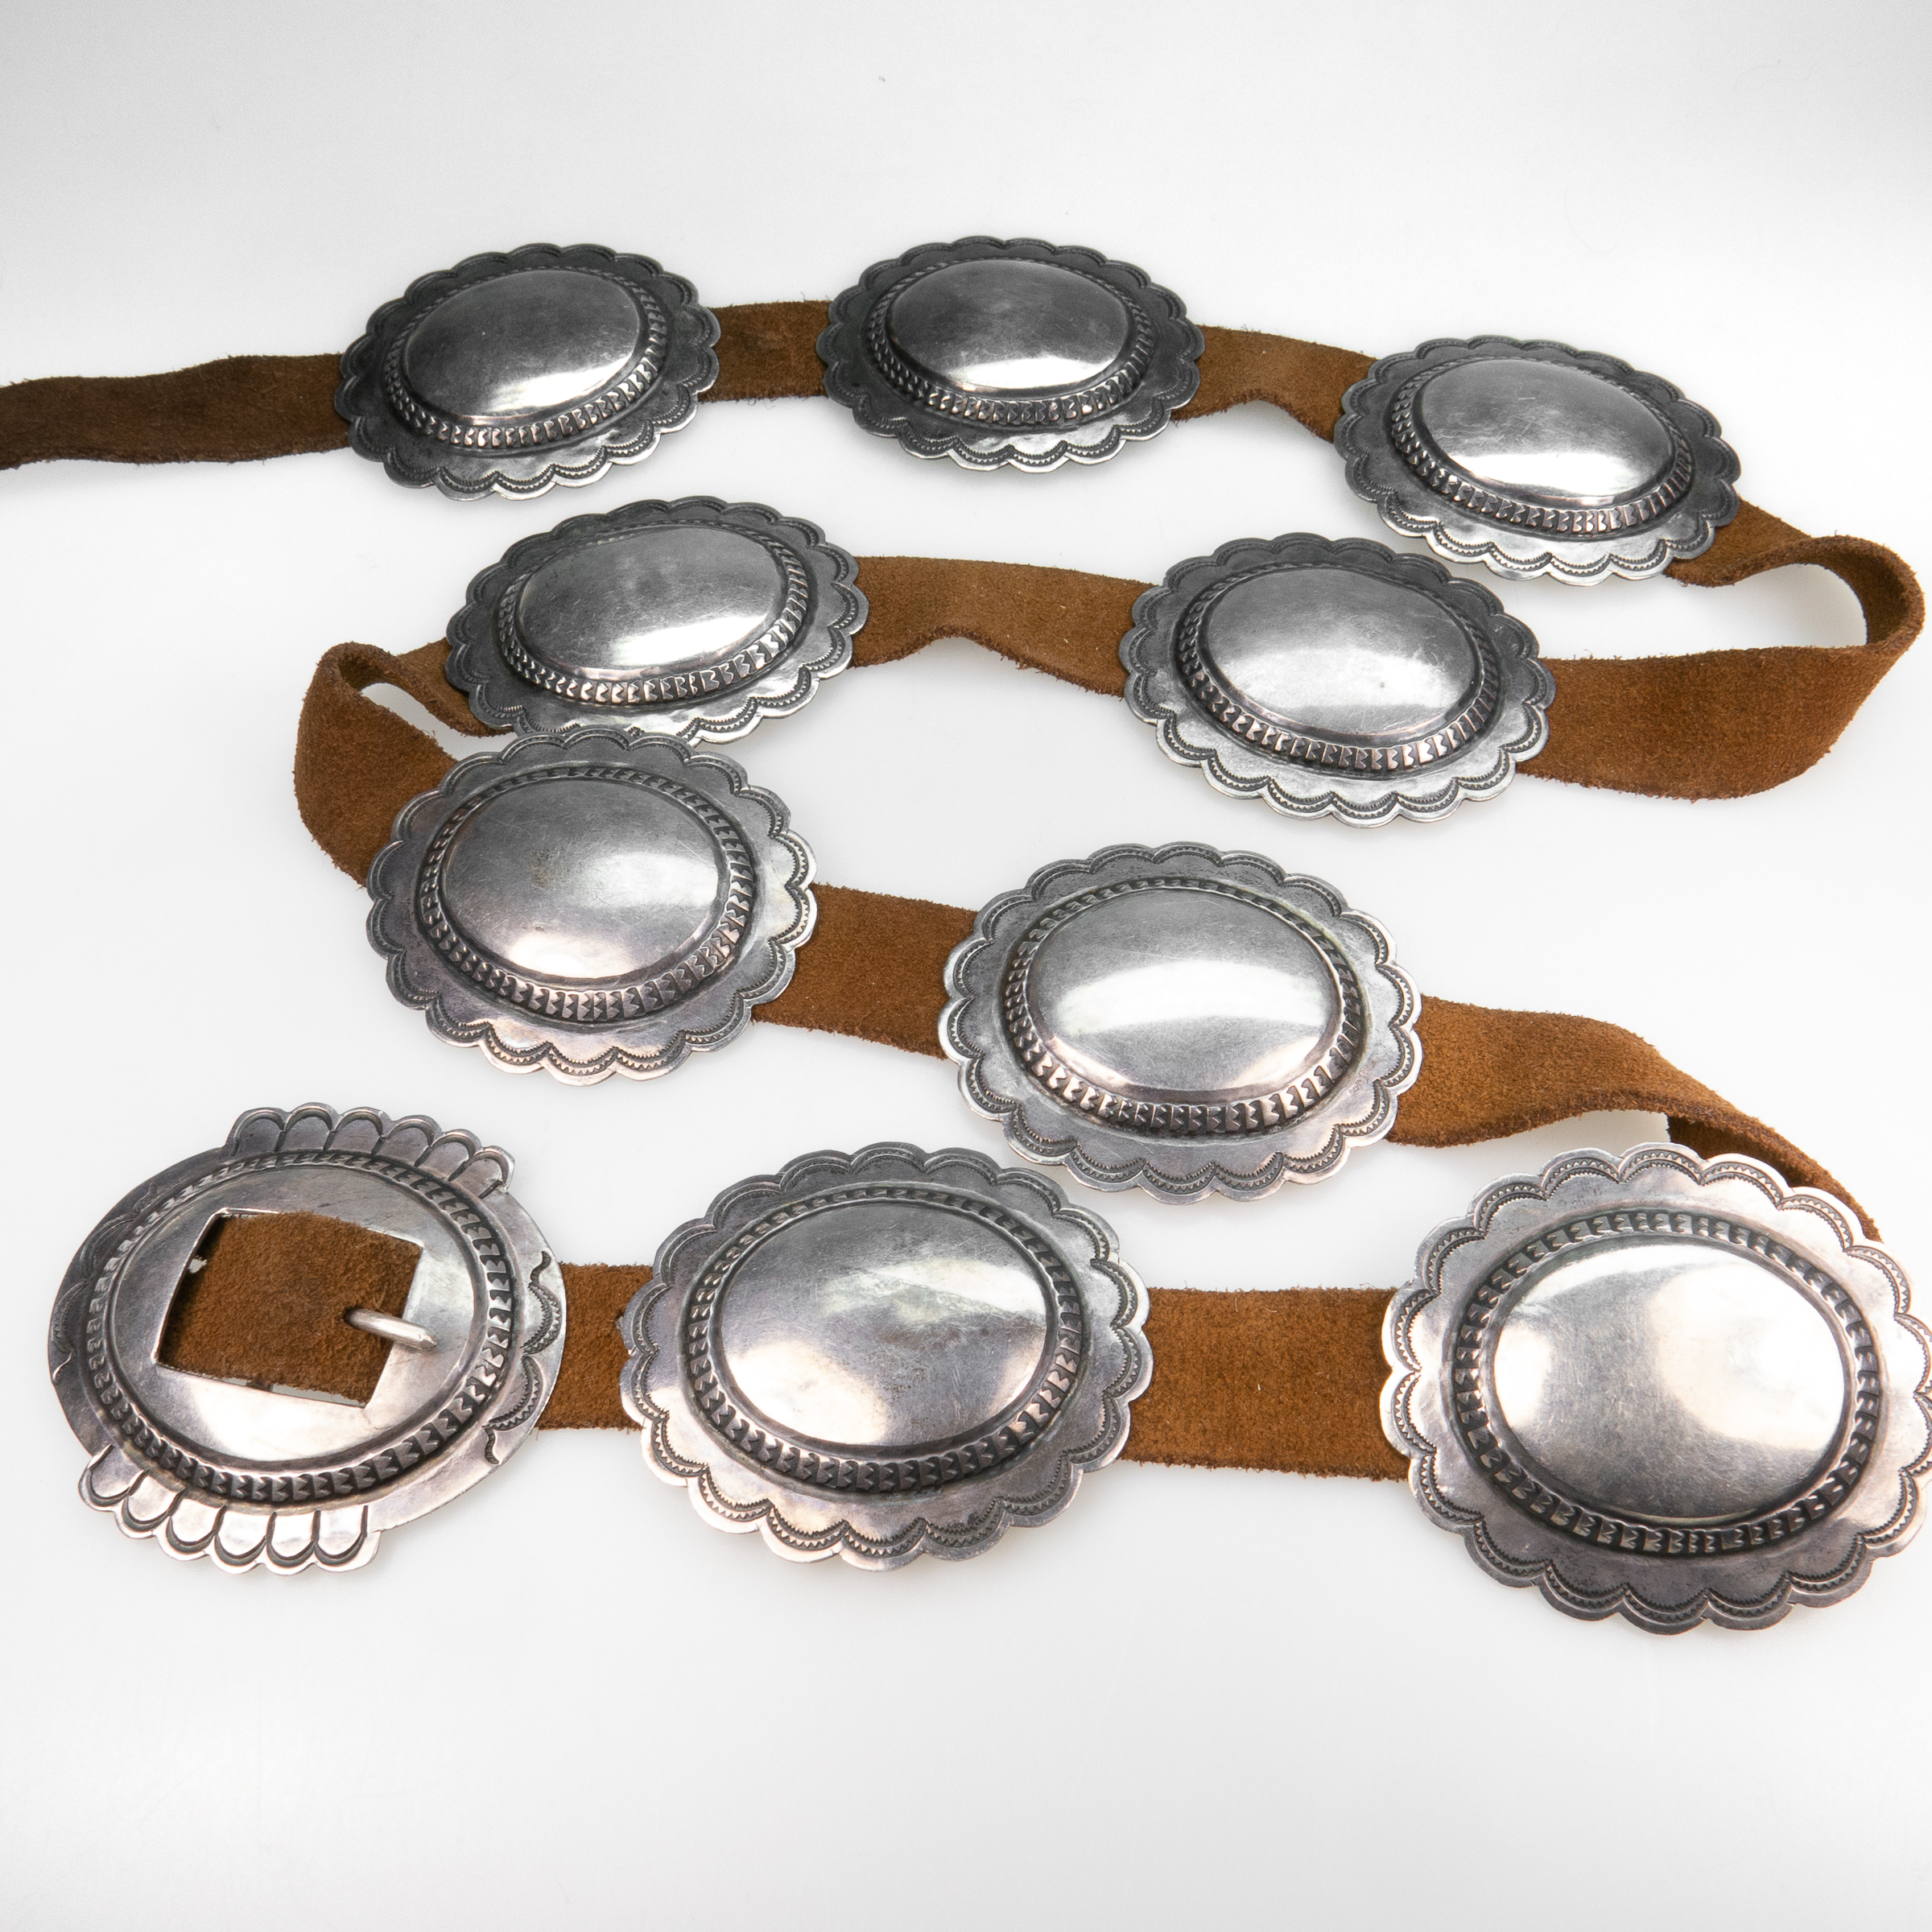 Navajo Silver And Leather Belt